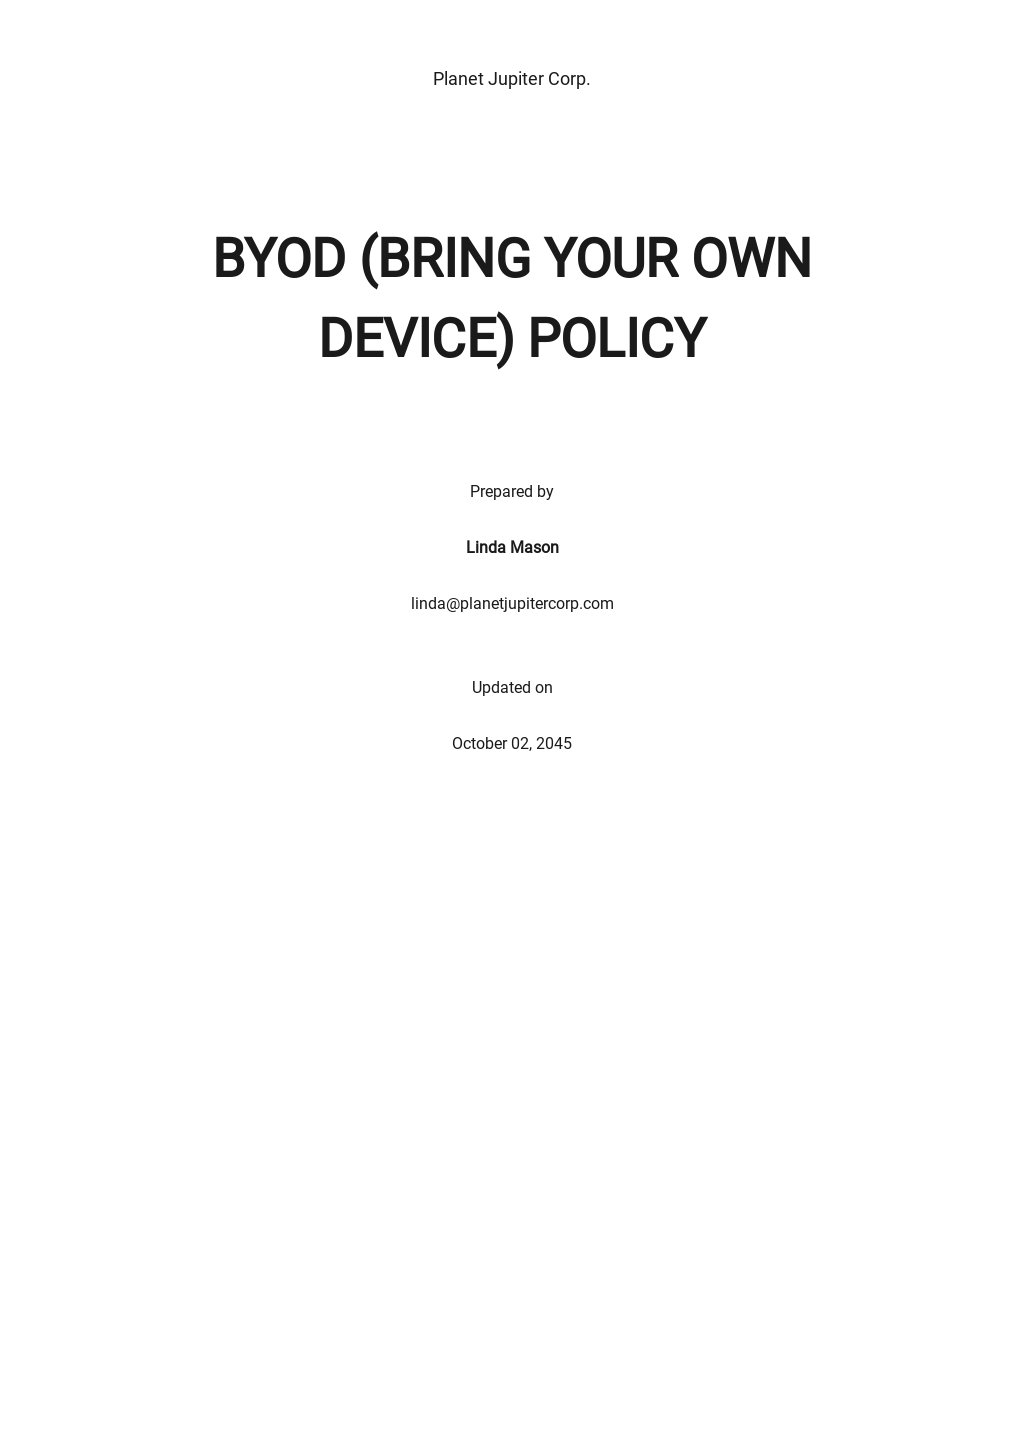 Byod Policy Template